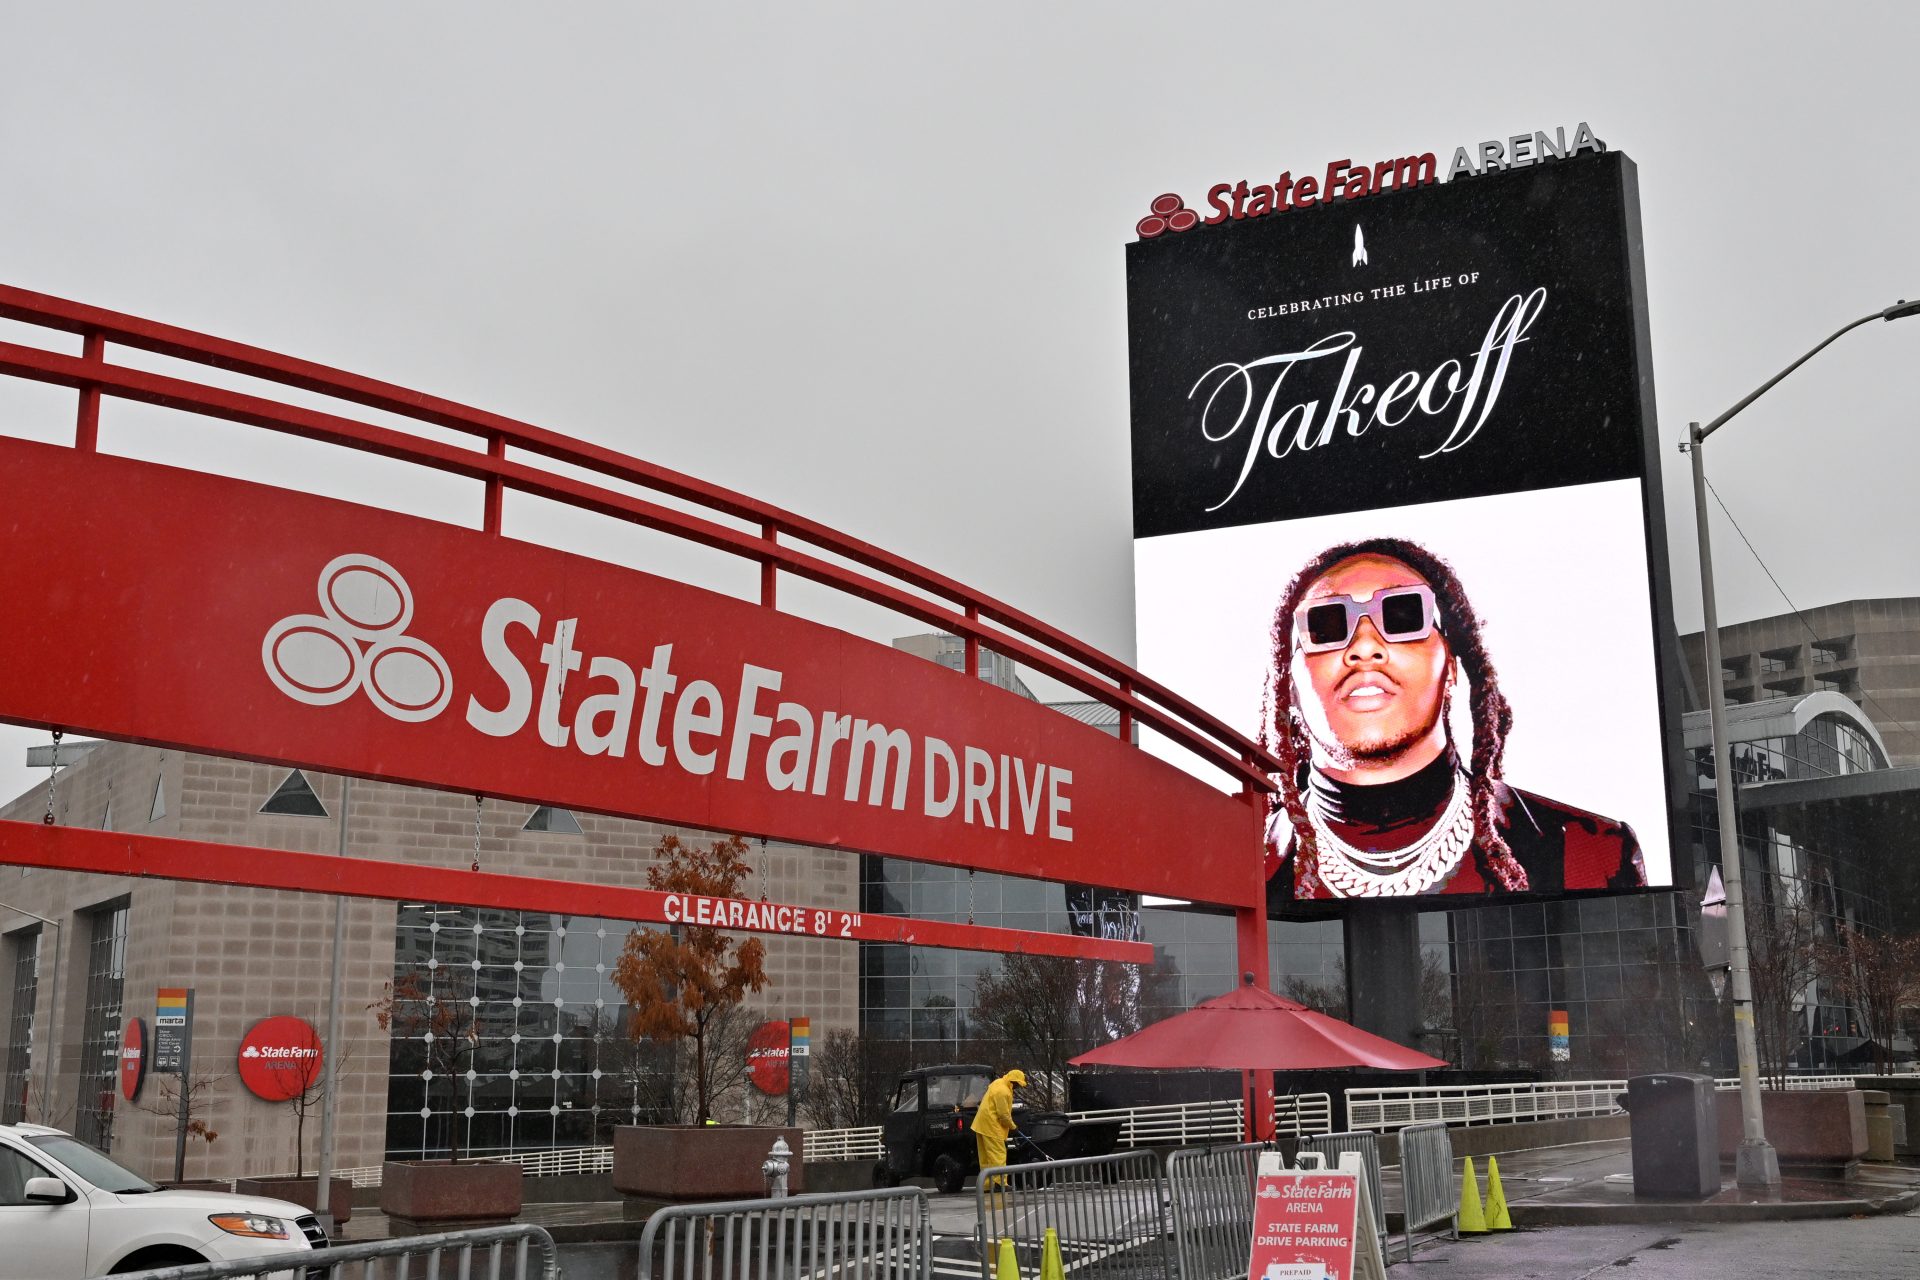 TAKEOFF: Family, Friends And Fans Gather In Atlanta For Funeral Services, Tributes Trend On Social Media